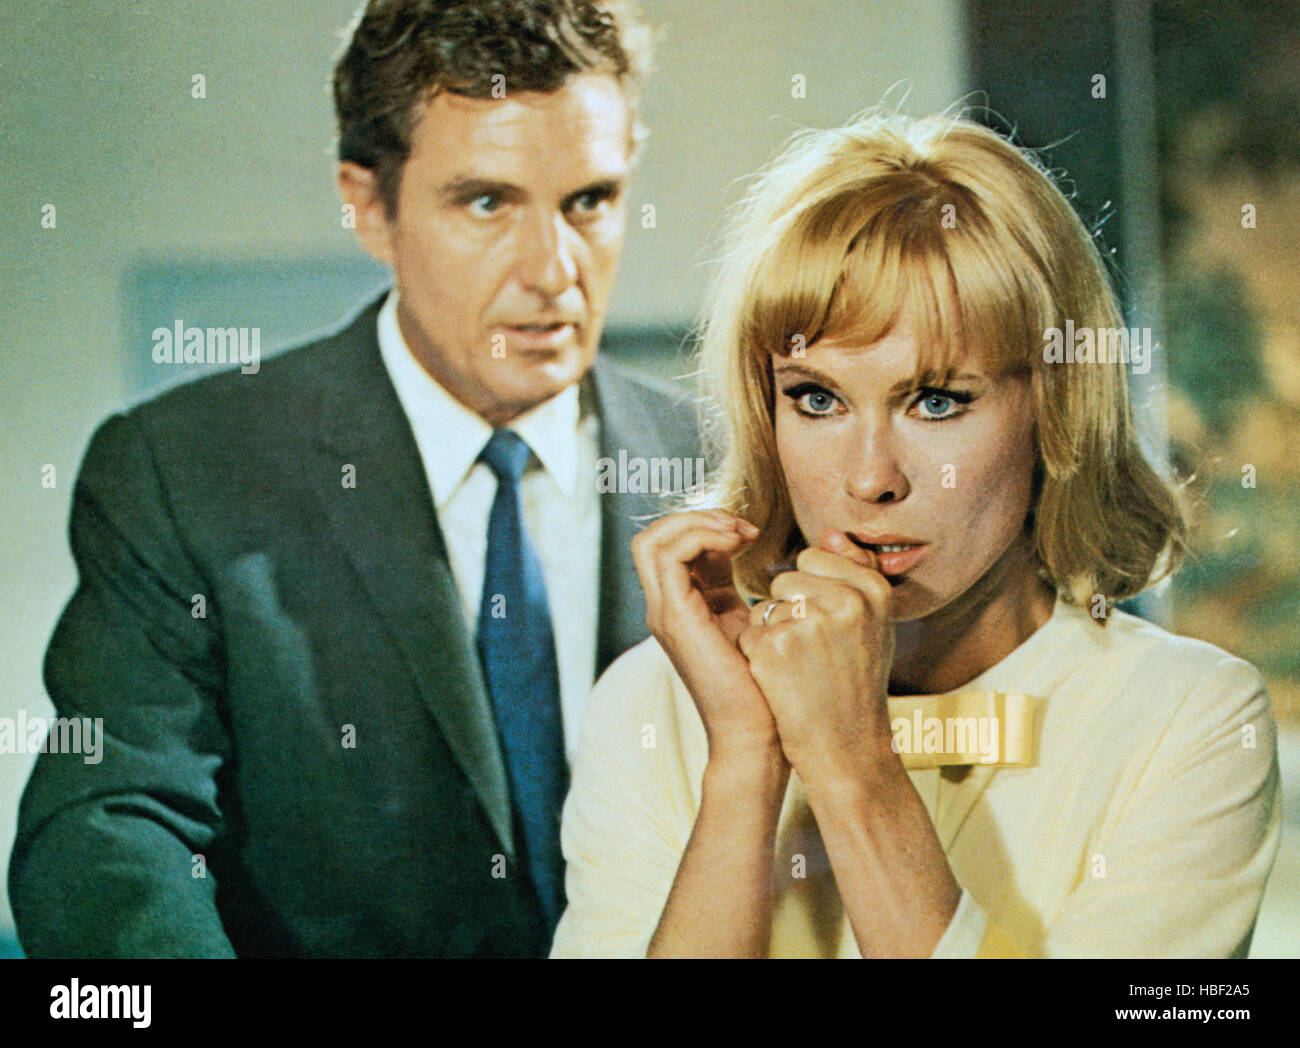 STORY OF A WOMAN, Robert Stack, Bibi Andersson, 1970 Stock Photo